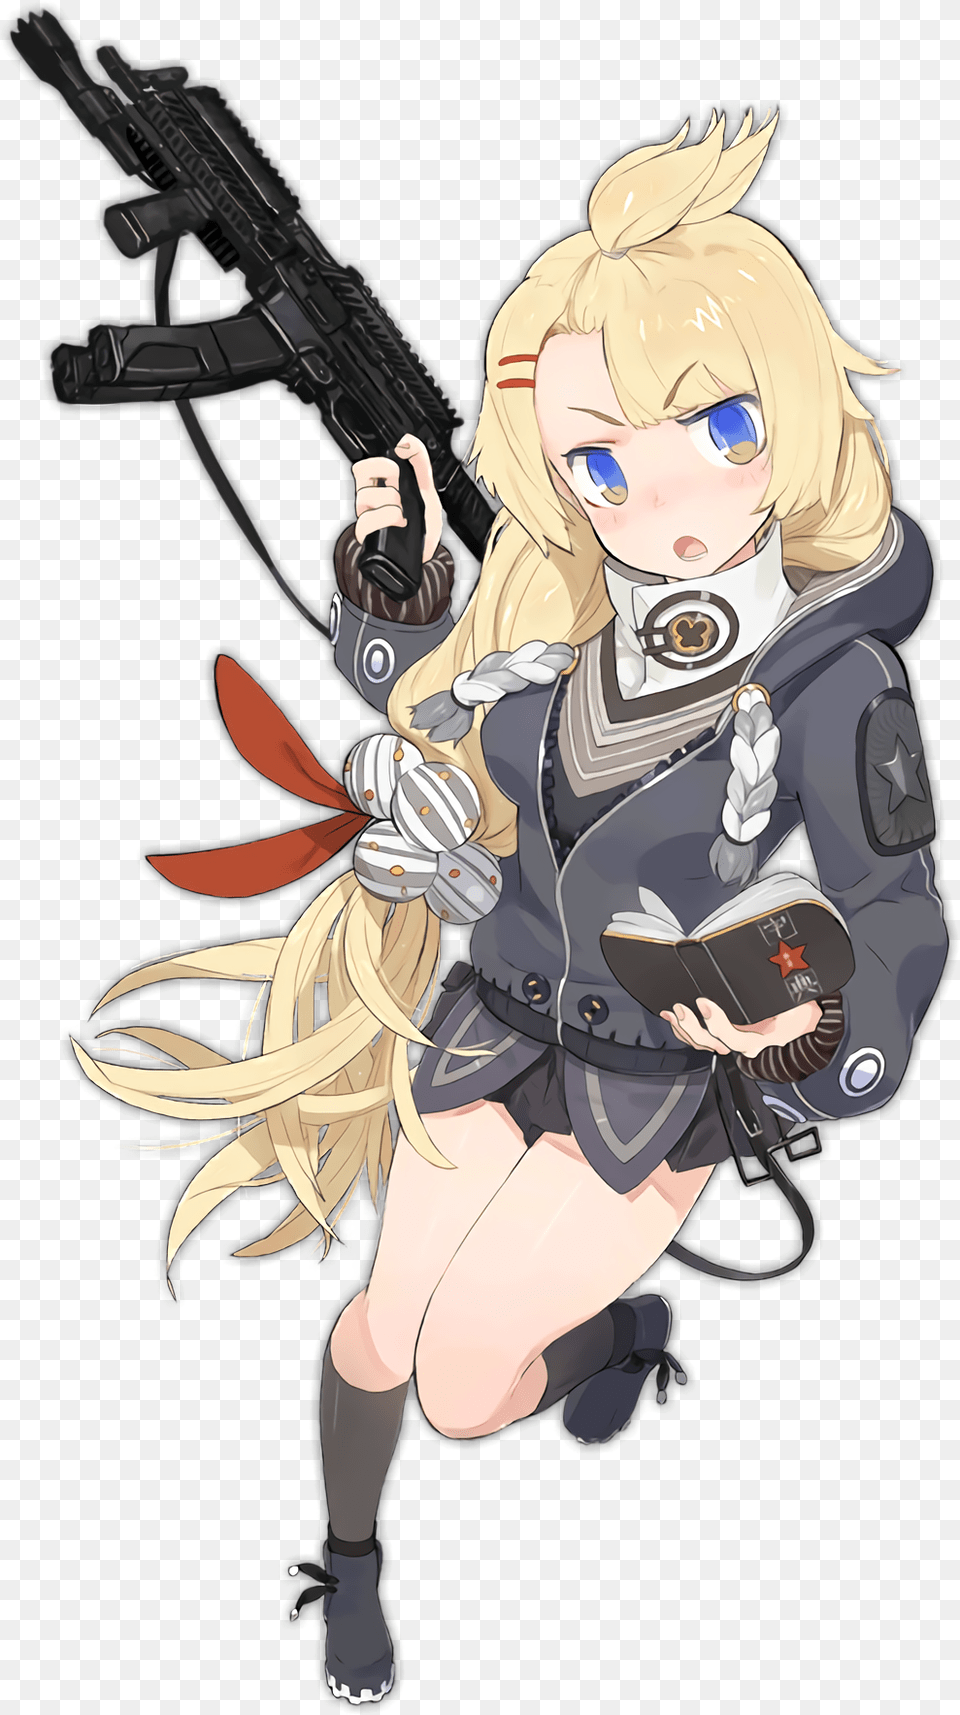 Transparent Anime Girl With Gun Pp1901 Girls Frontline, Book, Comics, Publication, Baby Png